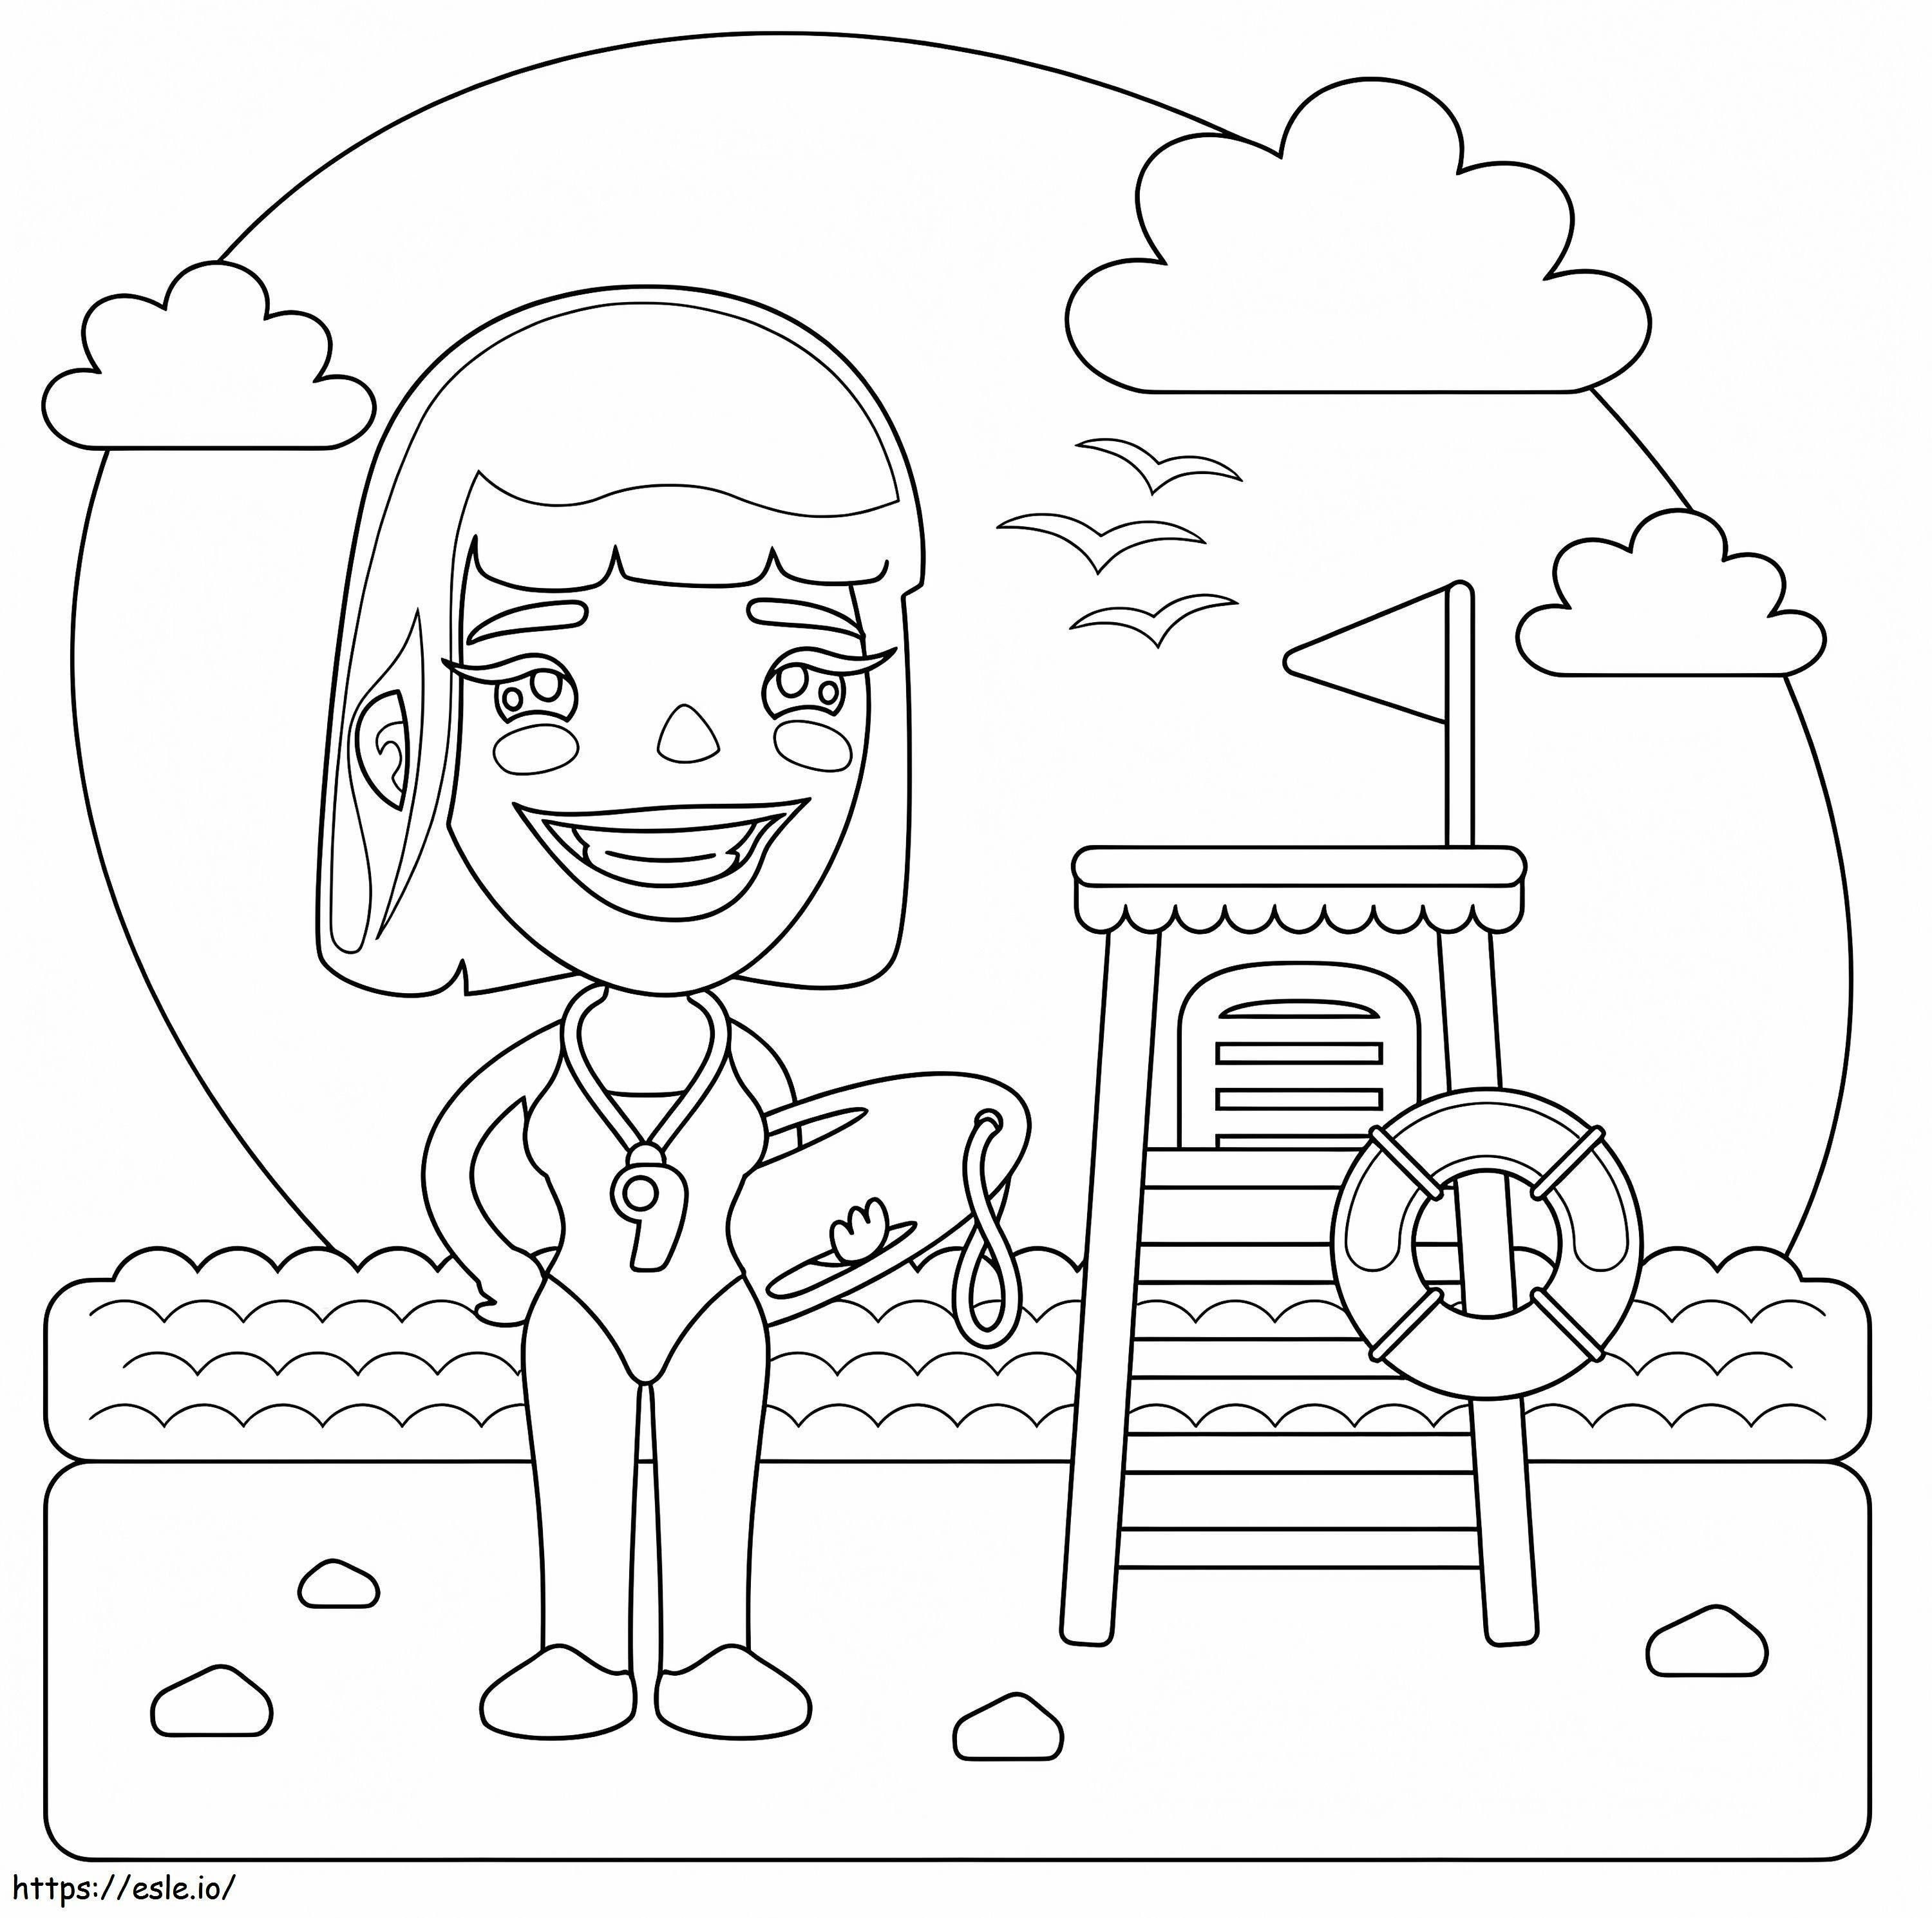 Happy Lifeguard coloring page